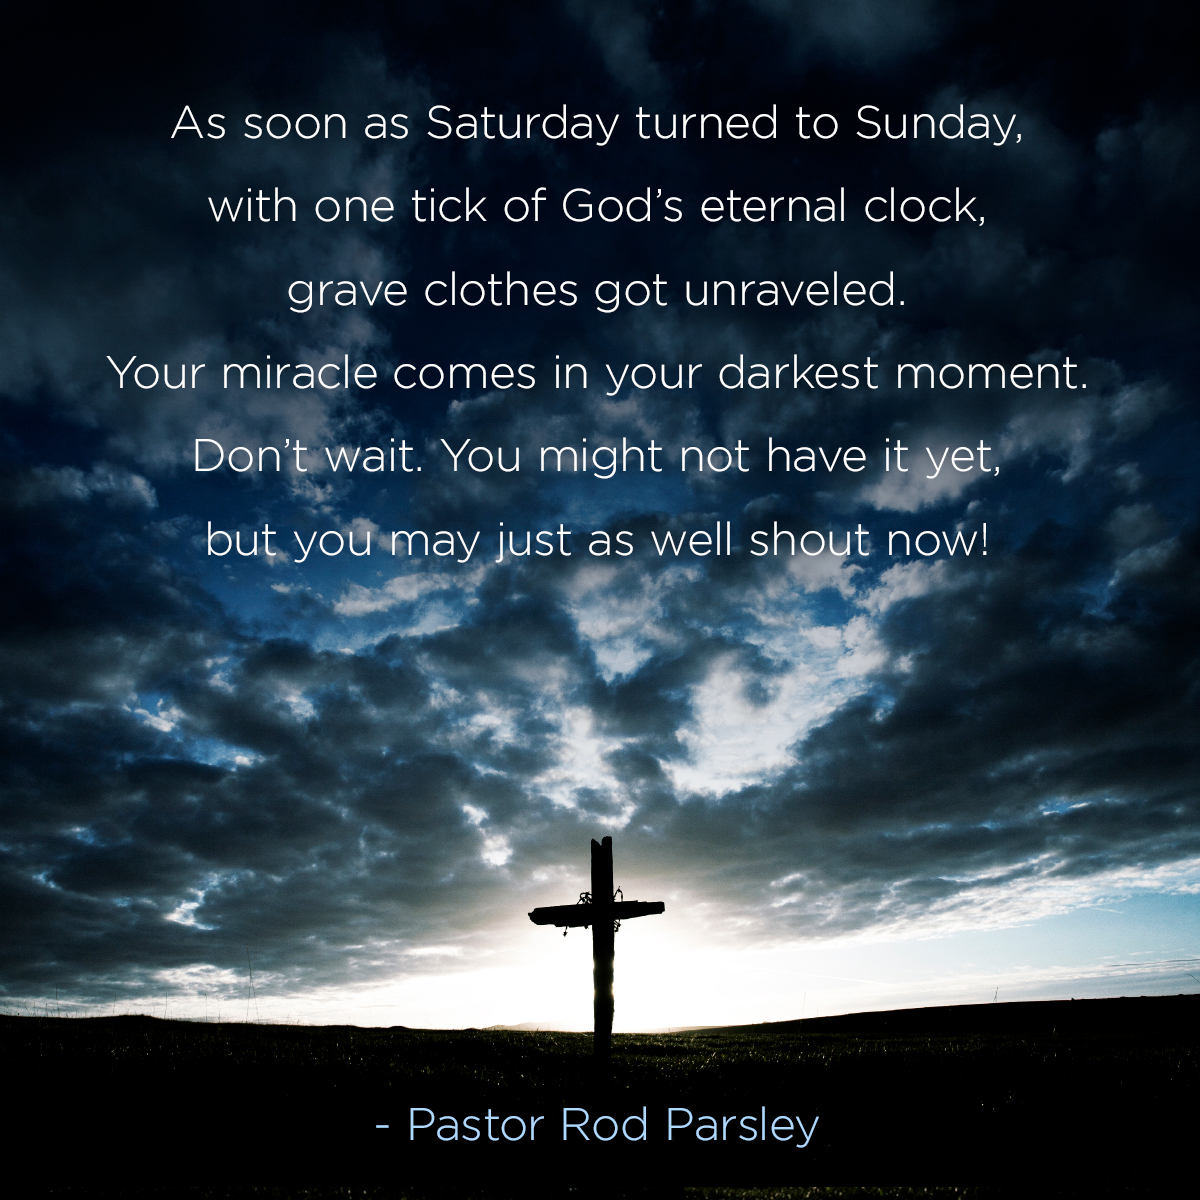 As soon as Saturday turned to Sunday, with one tick of God’s eternal clock, grave clothes got unraveled. Your miracle comes in your darkest moment. Don’t wait. You might not have it yet, but you may just as well shout now!” – Pastor Rod Parsley